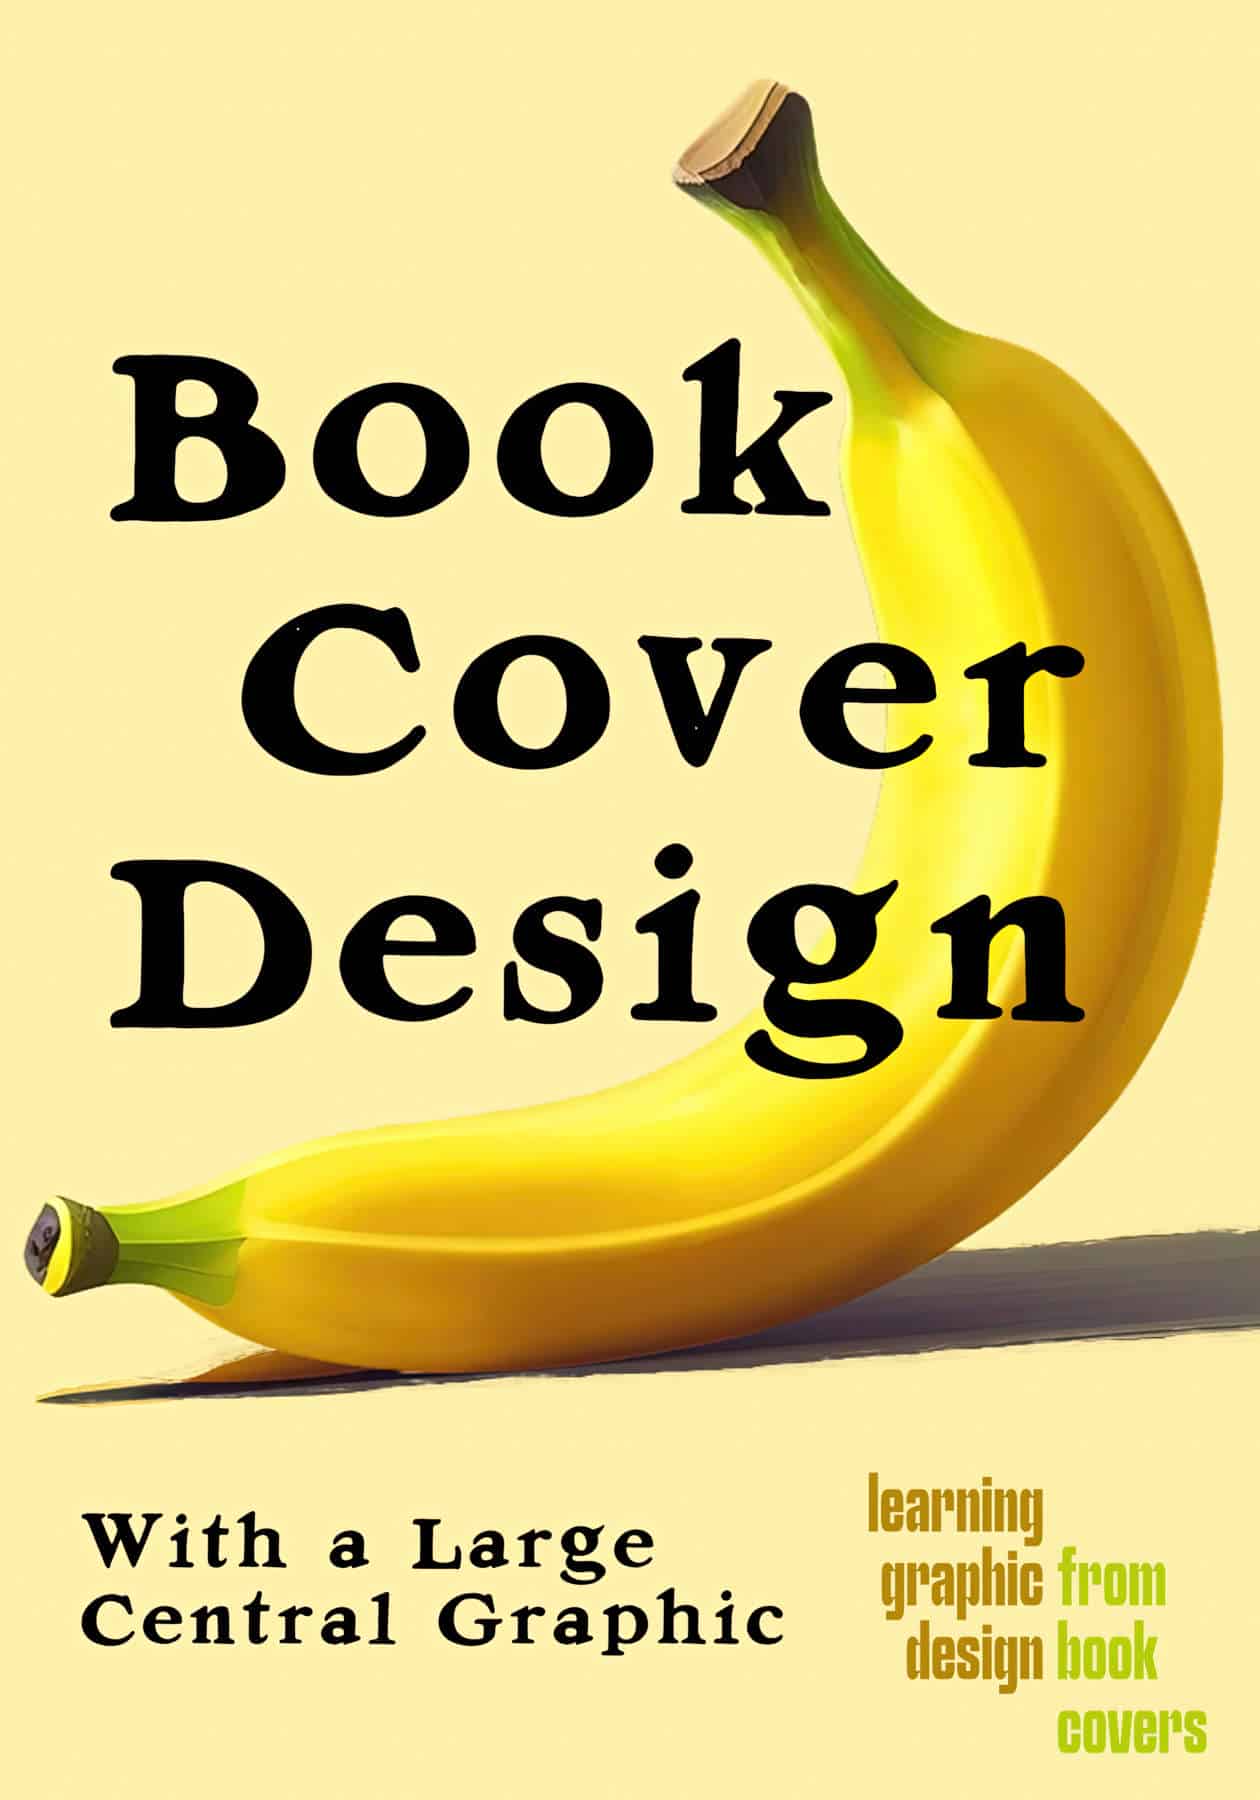 Book Cover Design With A Large Central Graphic